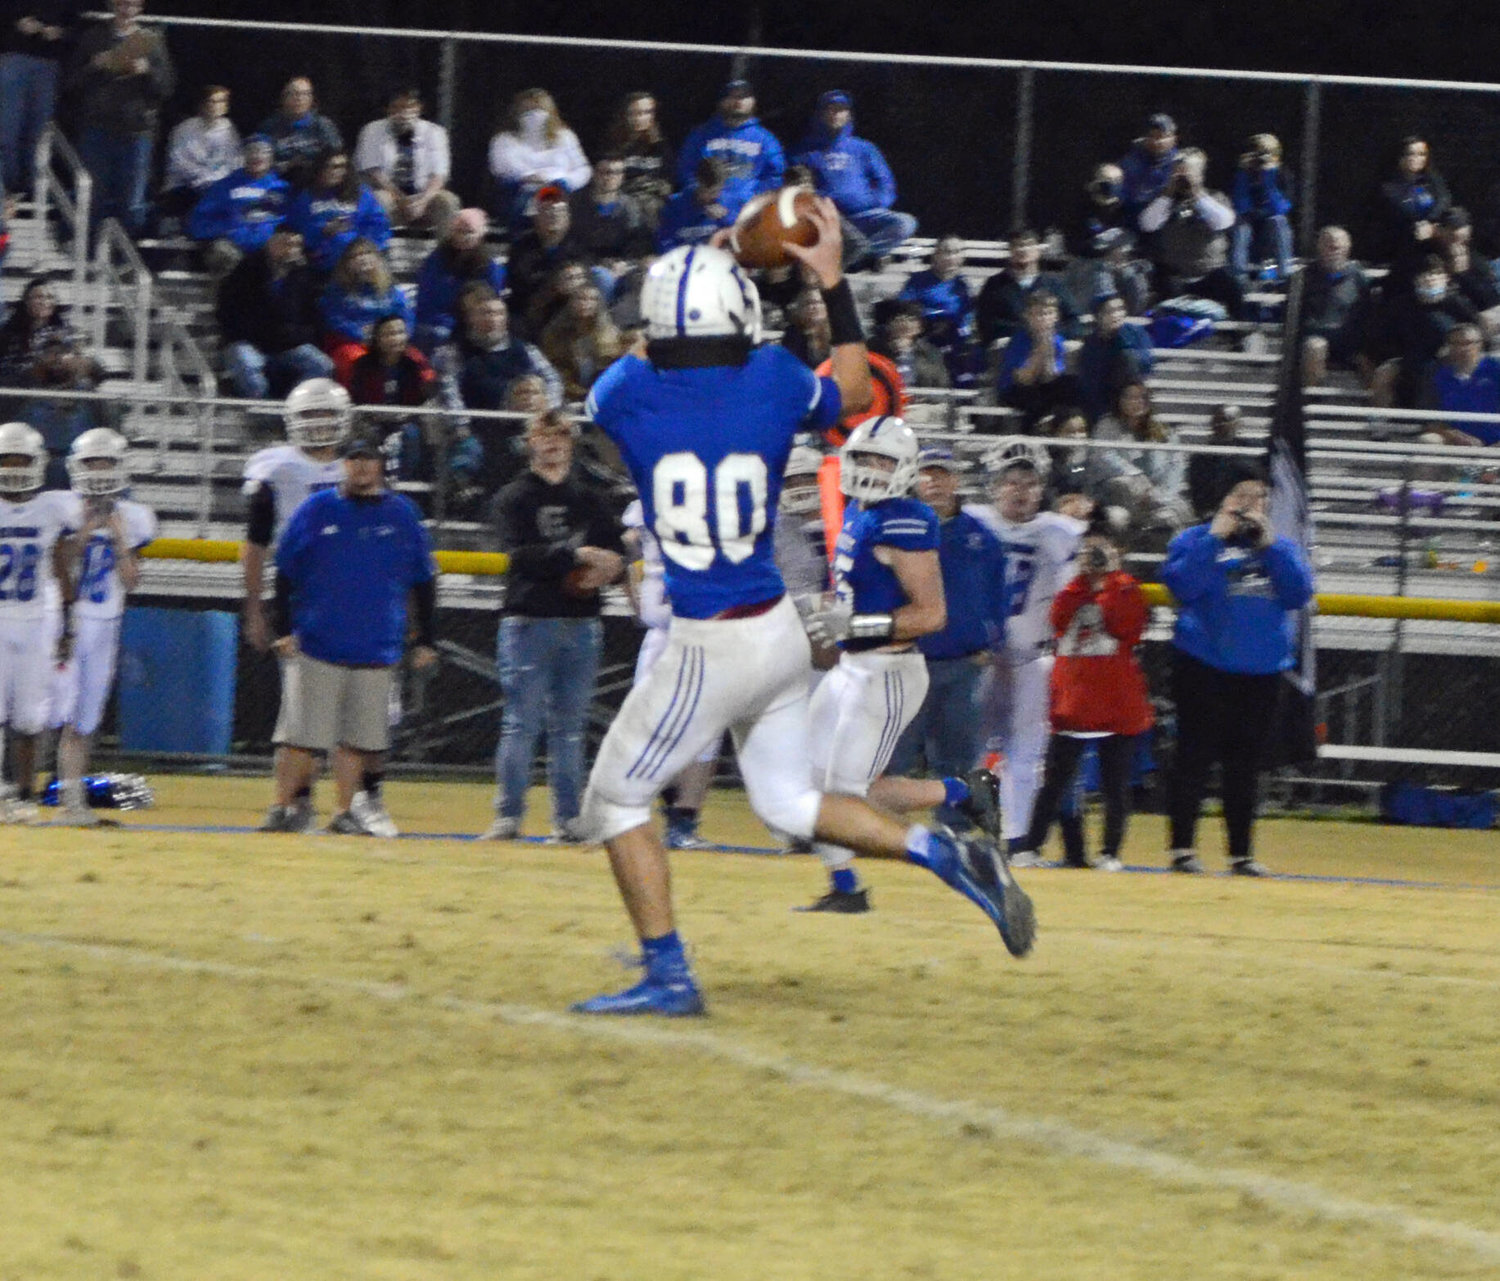 Junior wide receiver McCalister Wilson (80) makes the catch on a pass from Max Kirby before outrunning the East Hickman secondary for a 54-yard touchdown to put Forrest up 28-0 in the third quarter.